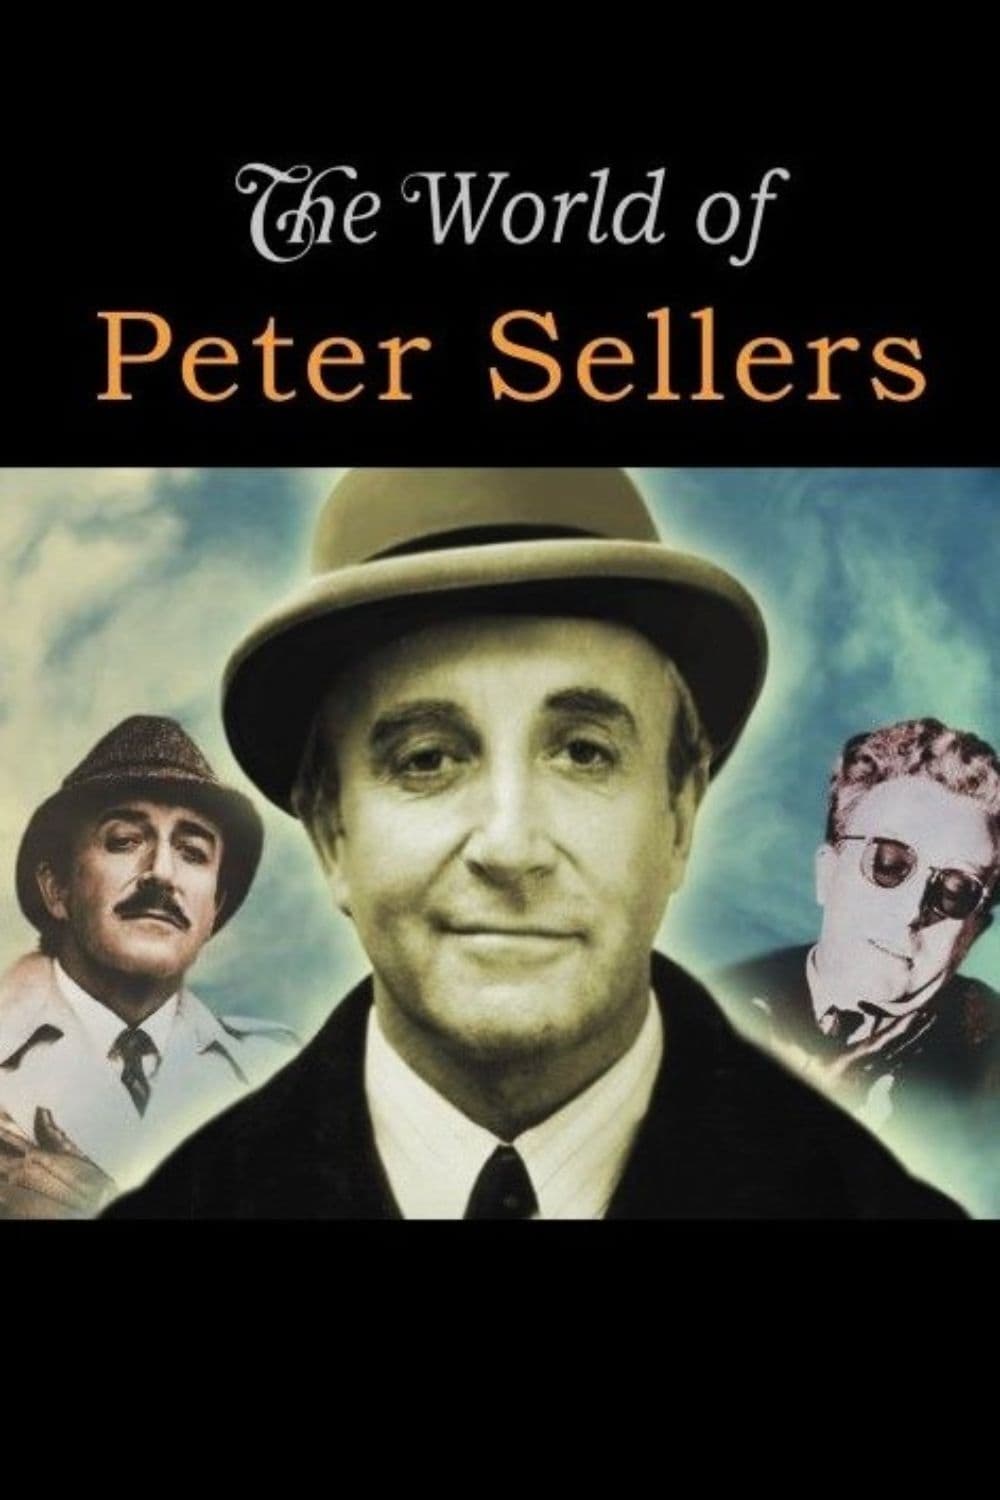 The World of Peter Sellers (2009)